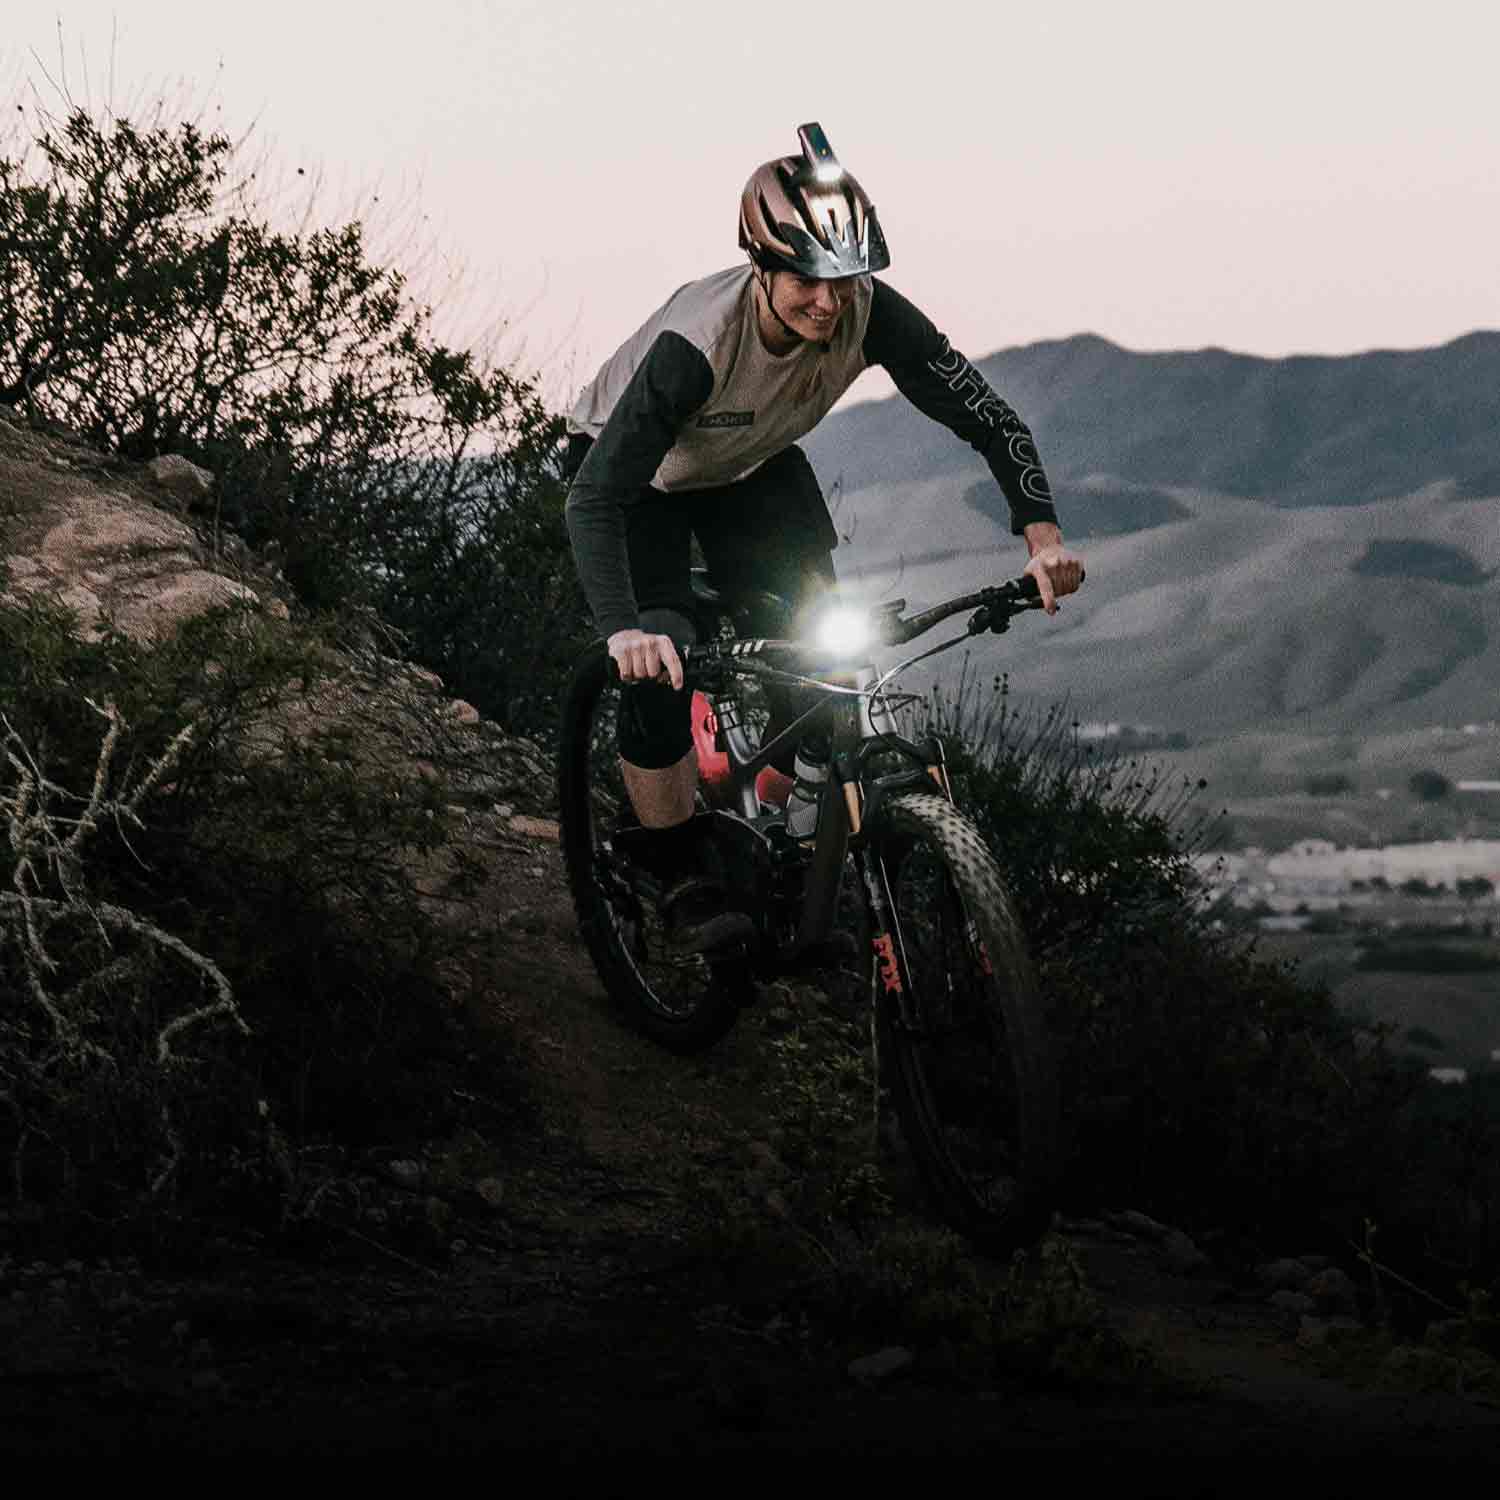 Someone riding a mountain bike on steep terrain with a bright front light on the handlebars.